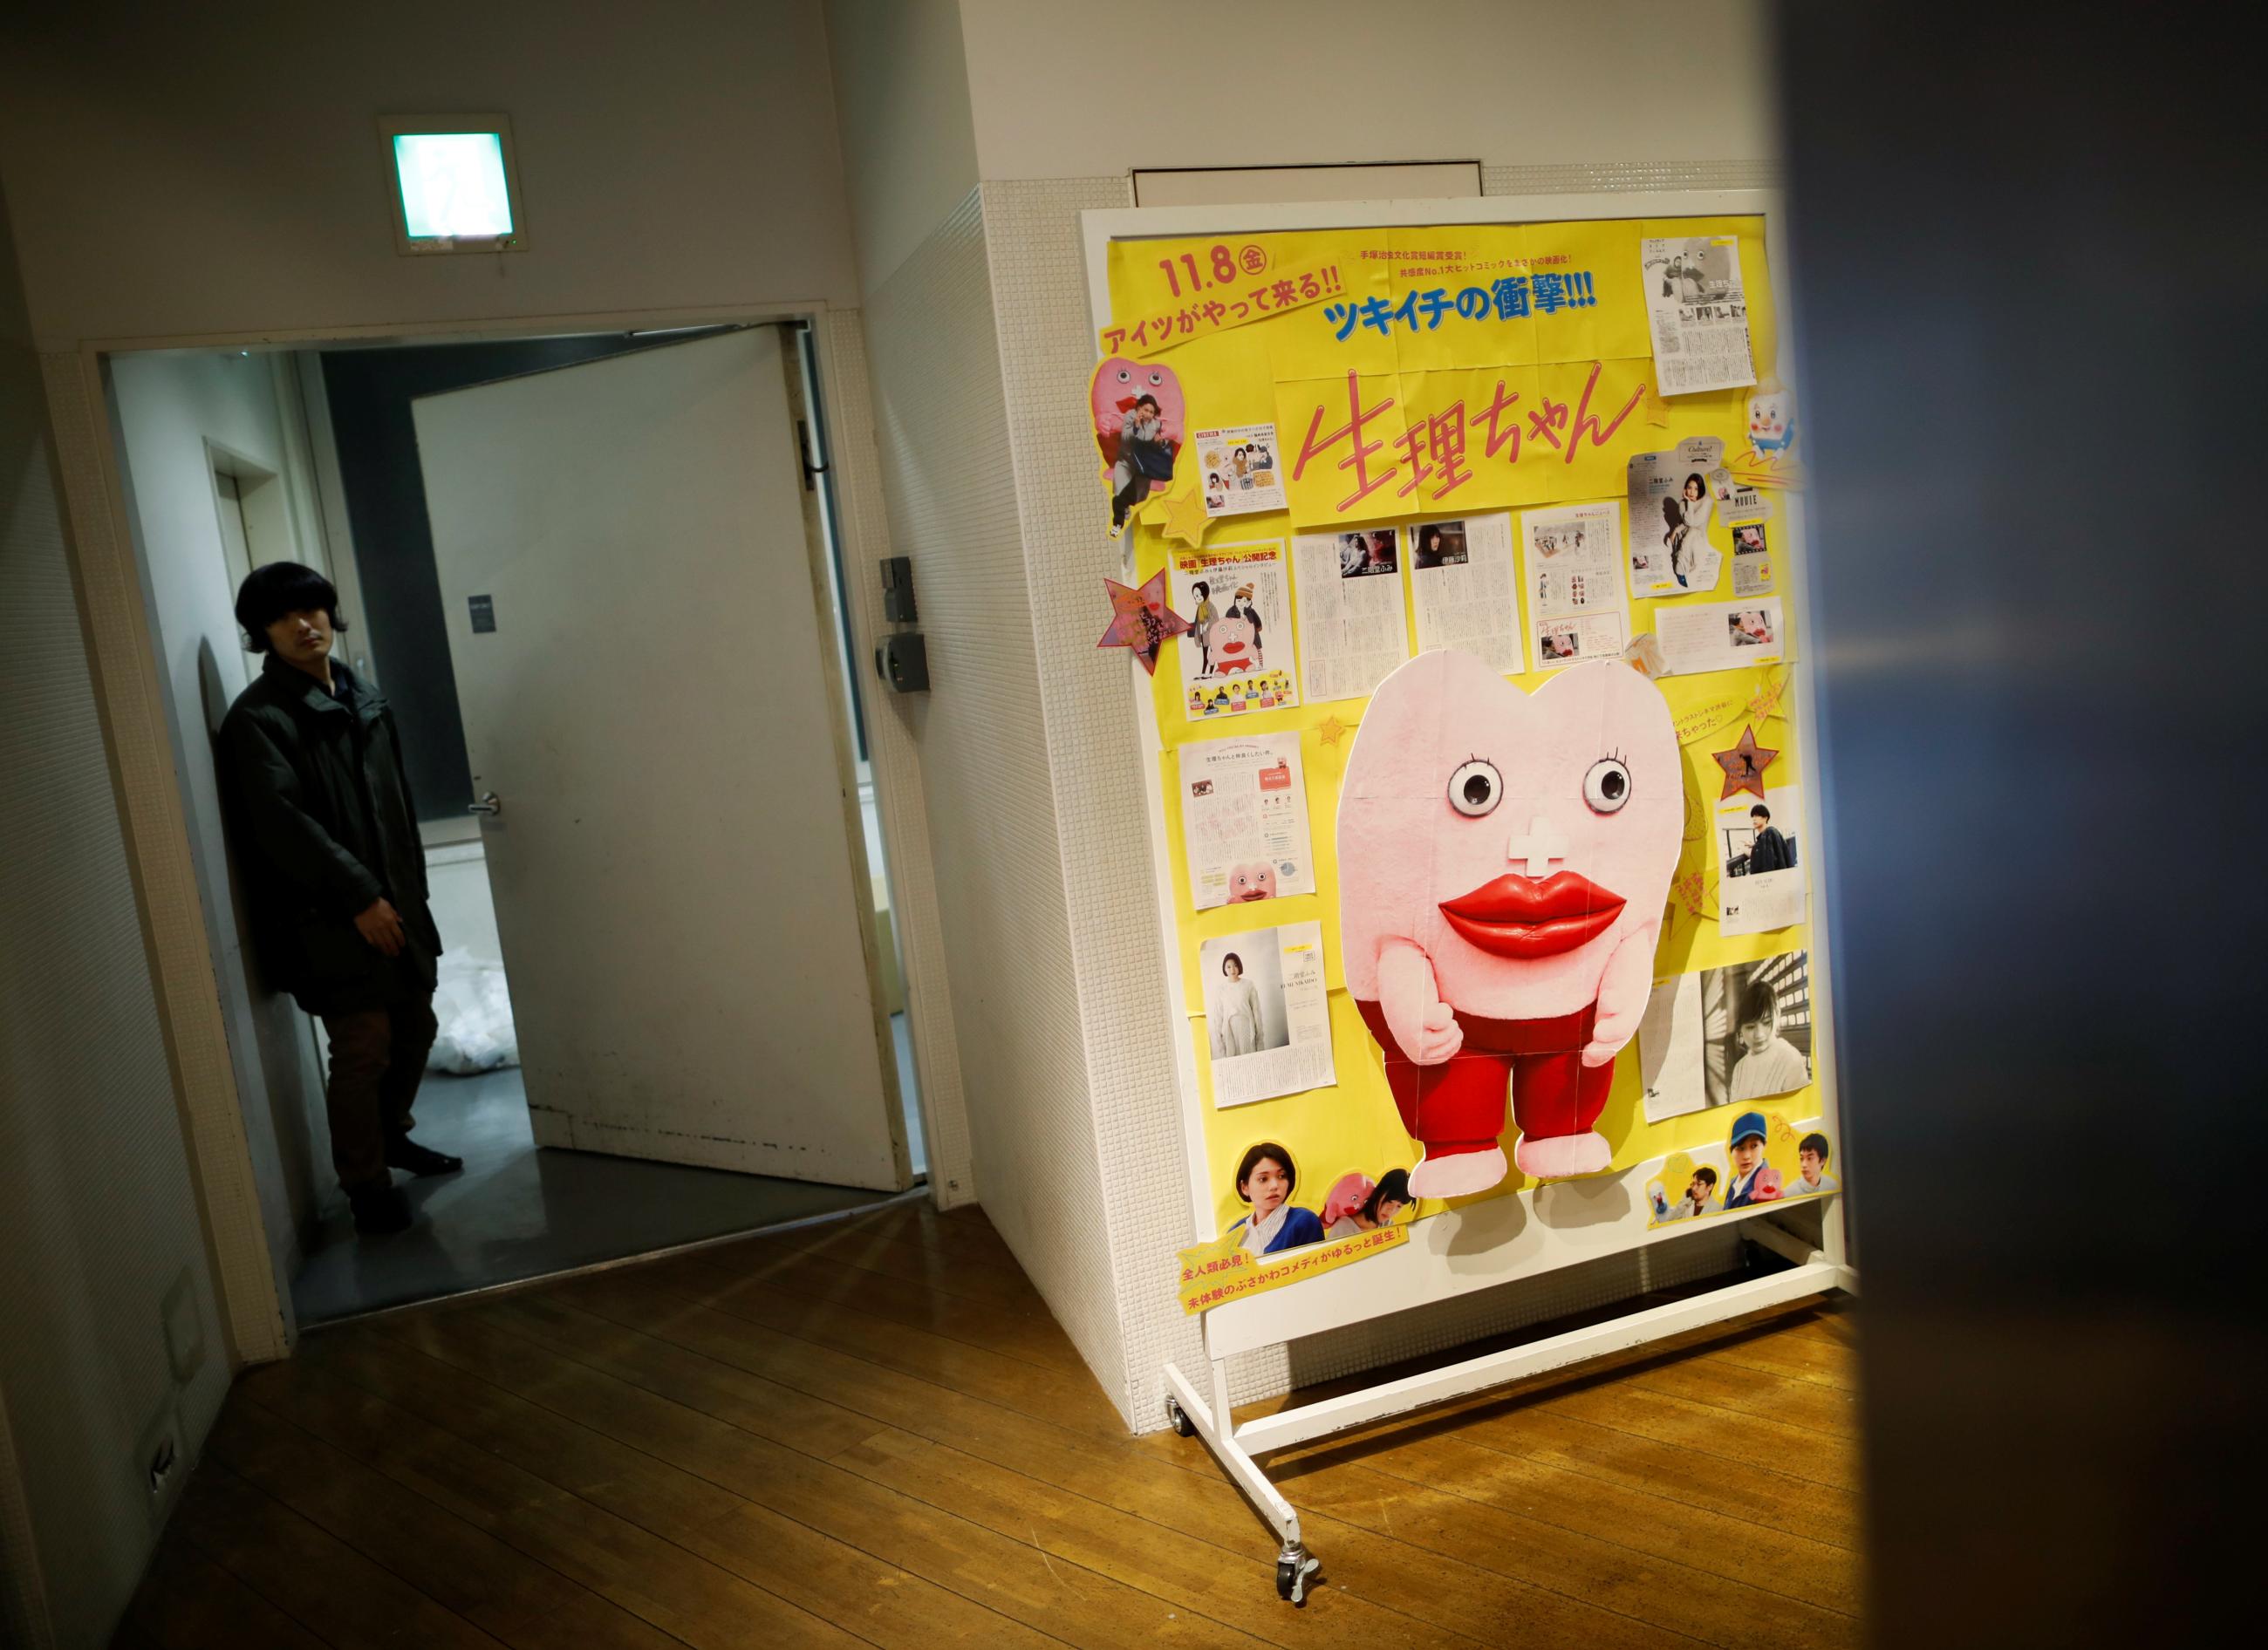 Recommended information on the movie "Seiri-chan" or 'Little Miss Period' is displayed at a movie theater in Tokyo, Japan, on December 13, 2019.